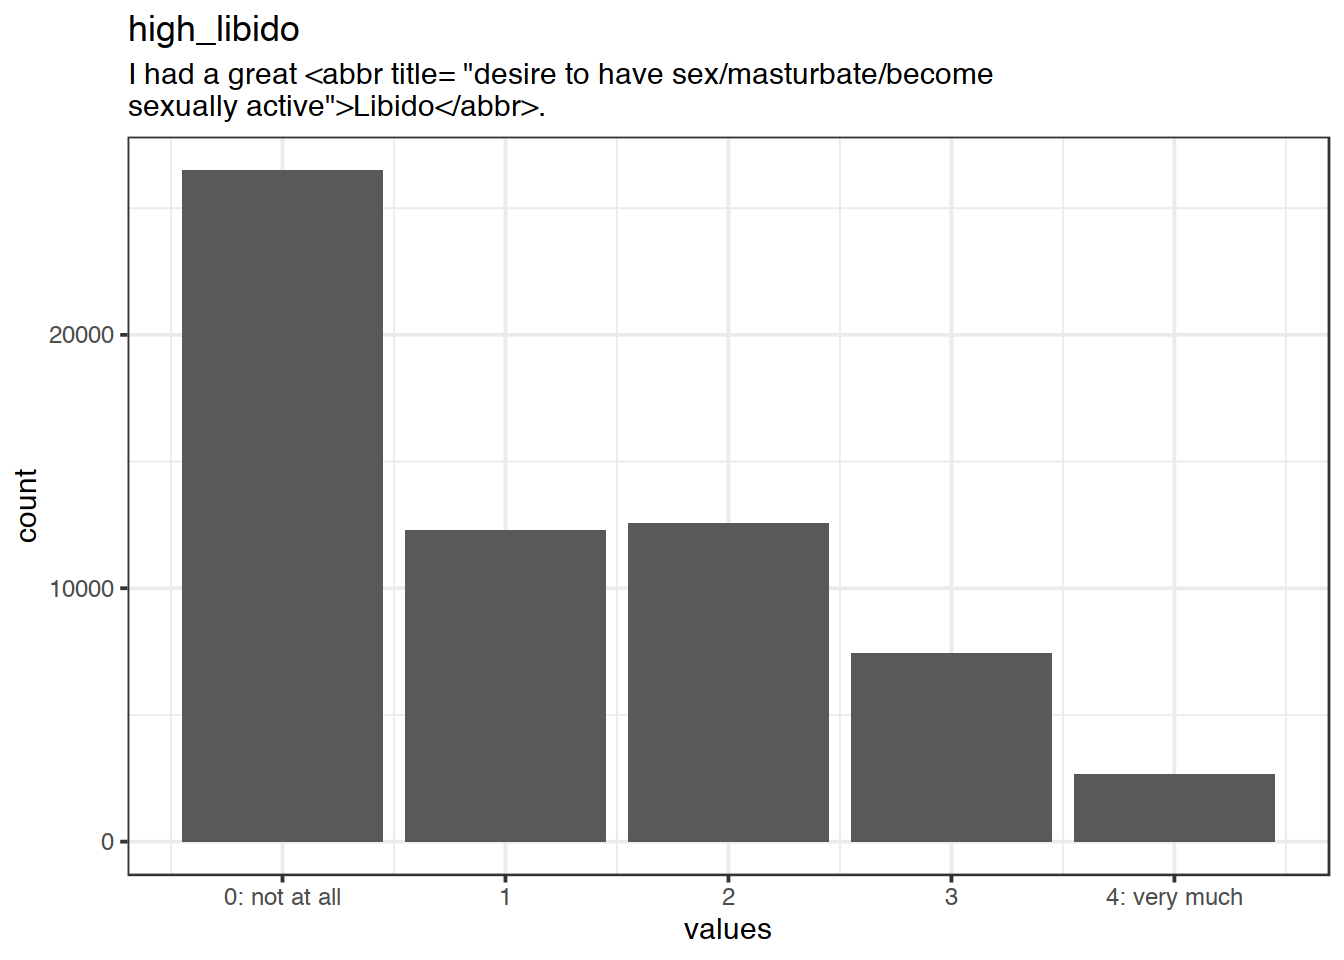 Distribution of values for high_libido